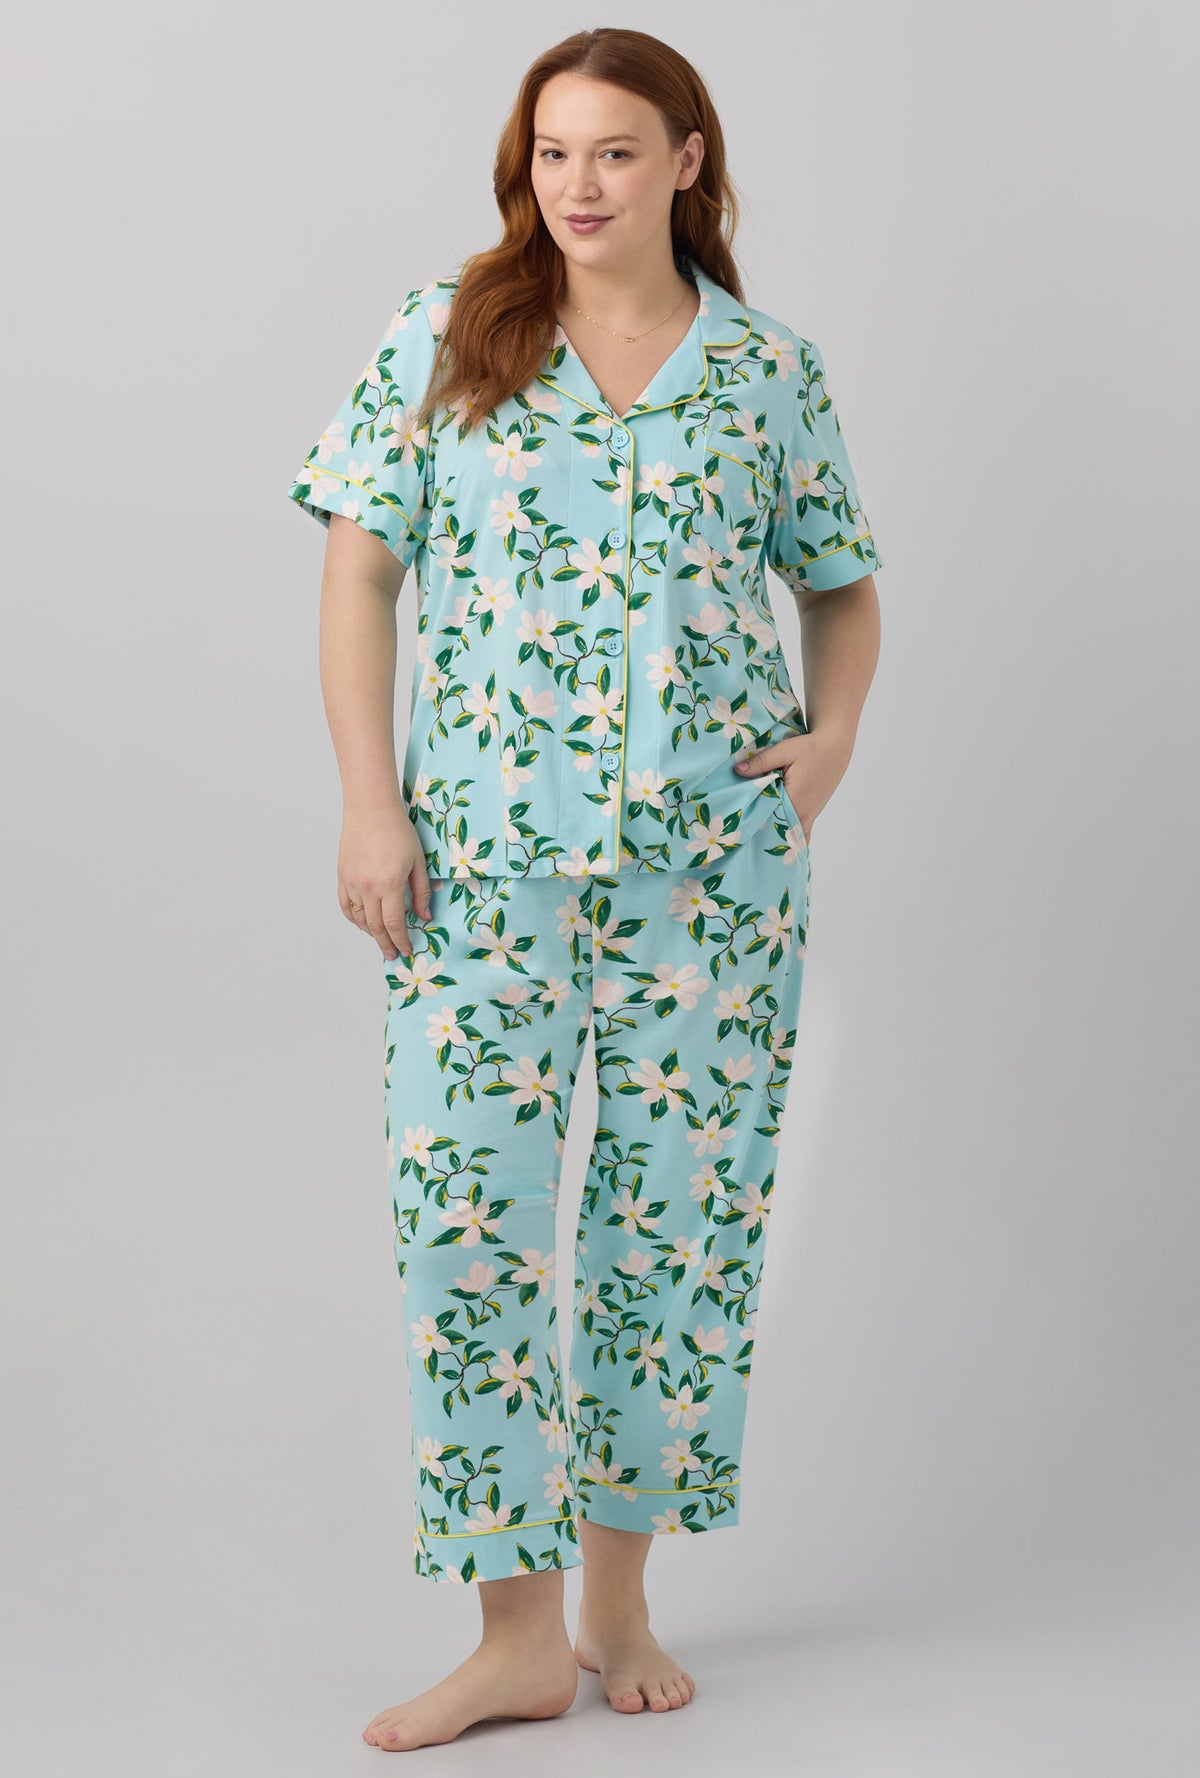 A lady wearing short sleeve classic stretch jersey cropped pj set with belle blossoms print